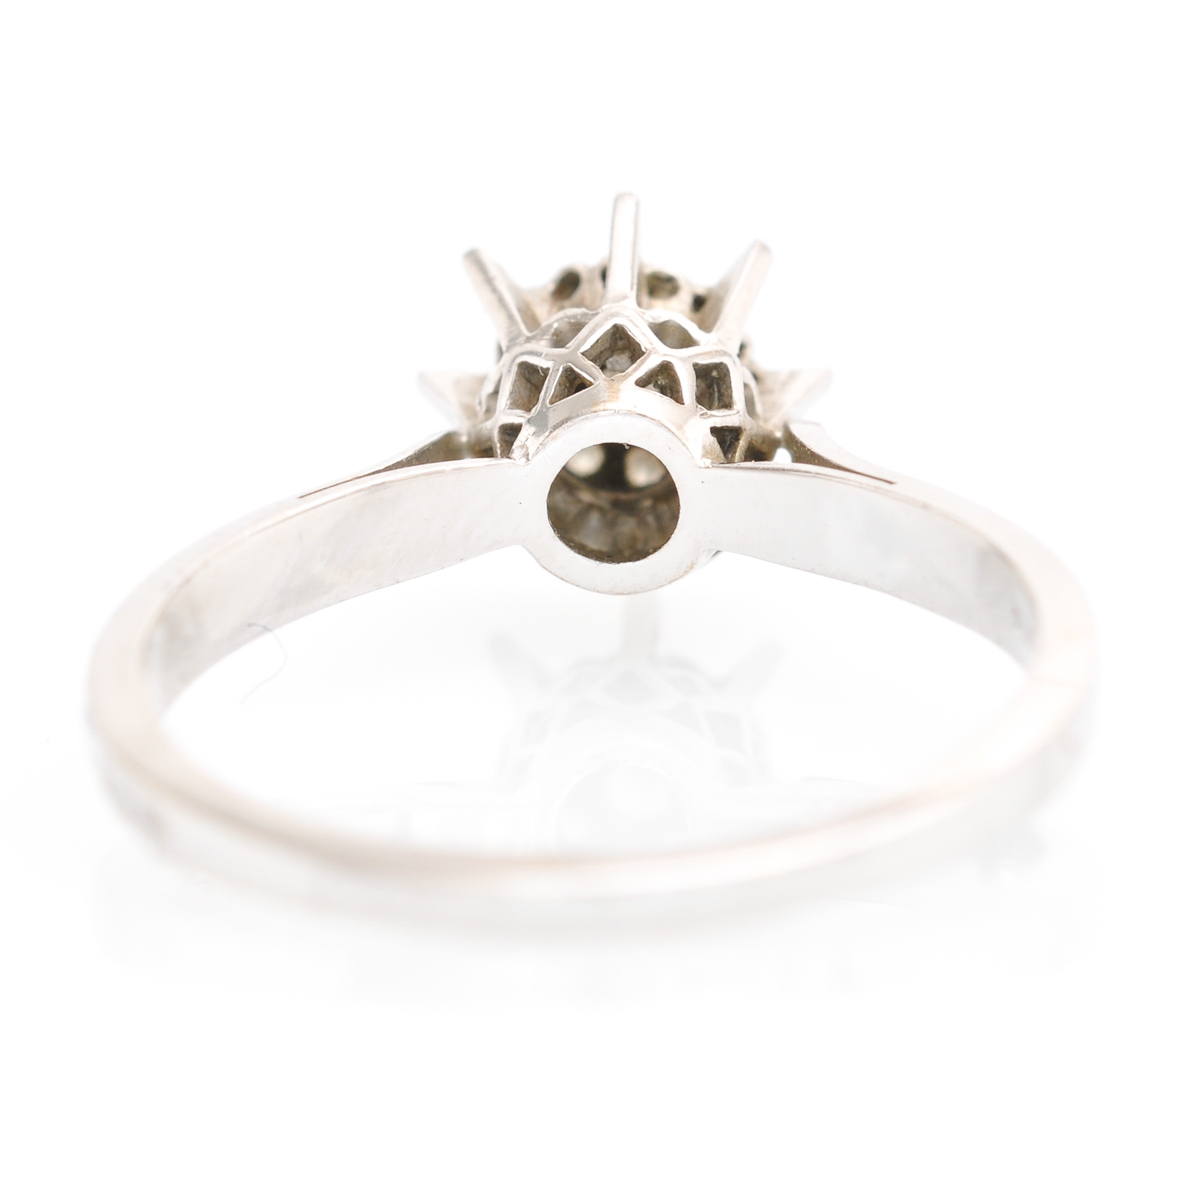 A 14KWG Ladies Diamond Ring Approximately 0.55 CTW - Image 2 of 2